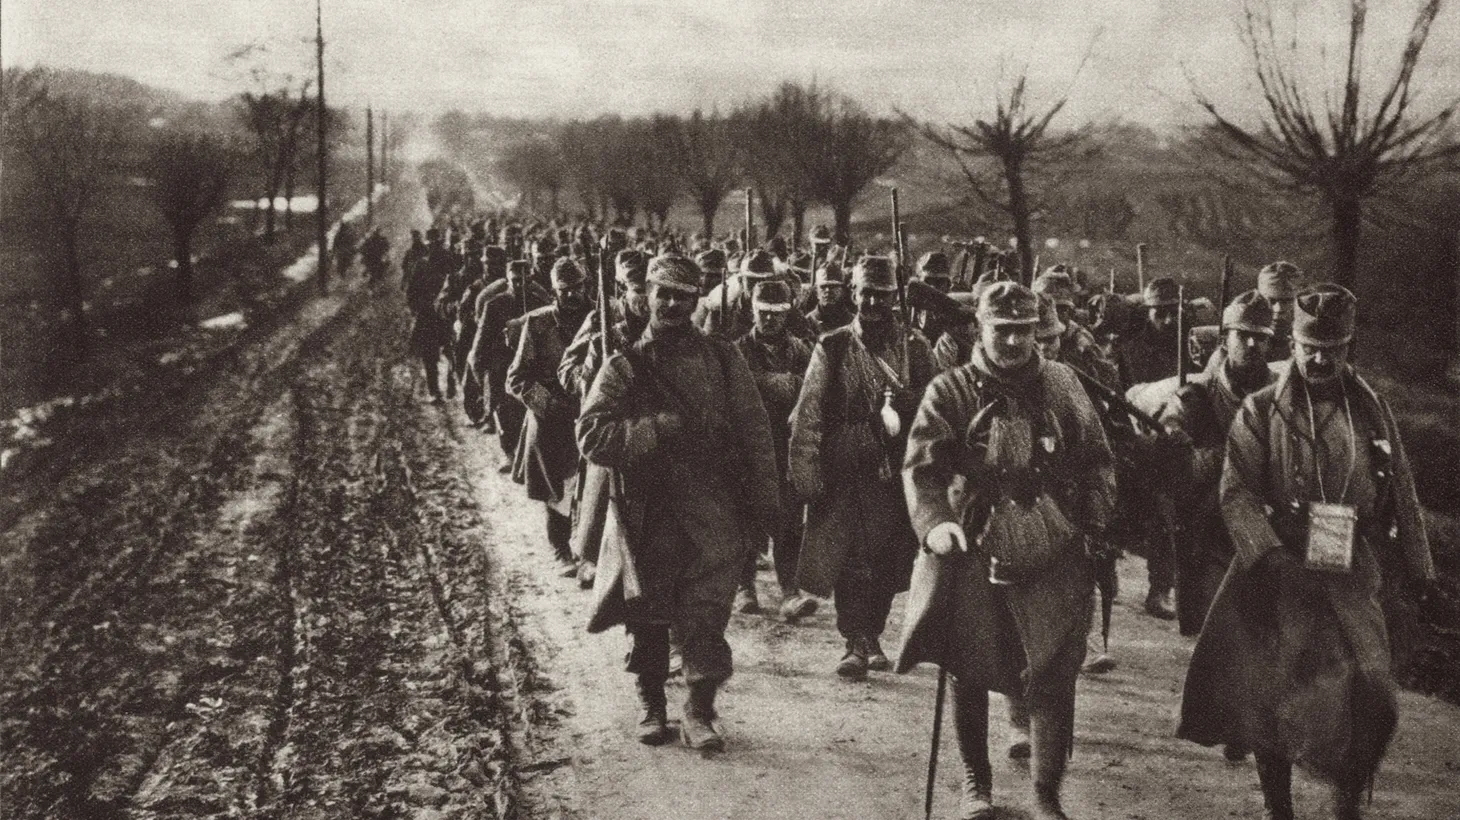 An Austrian soldier column marching through the flat country of Eastern Europe during WWI, 1914-17.